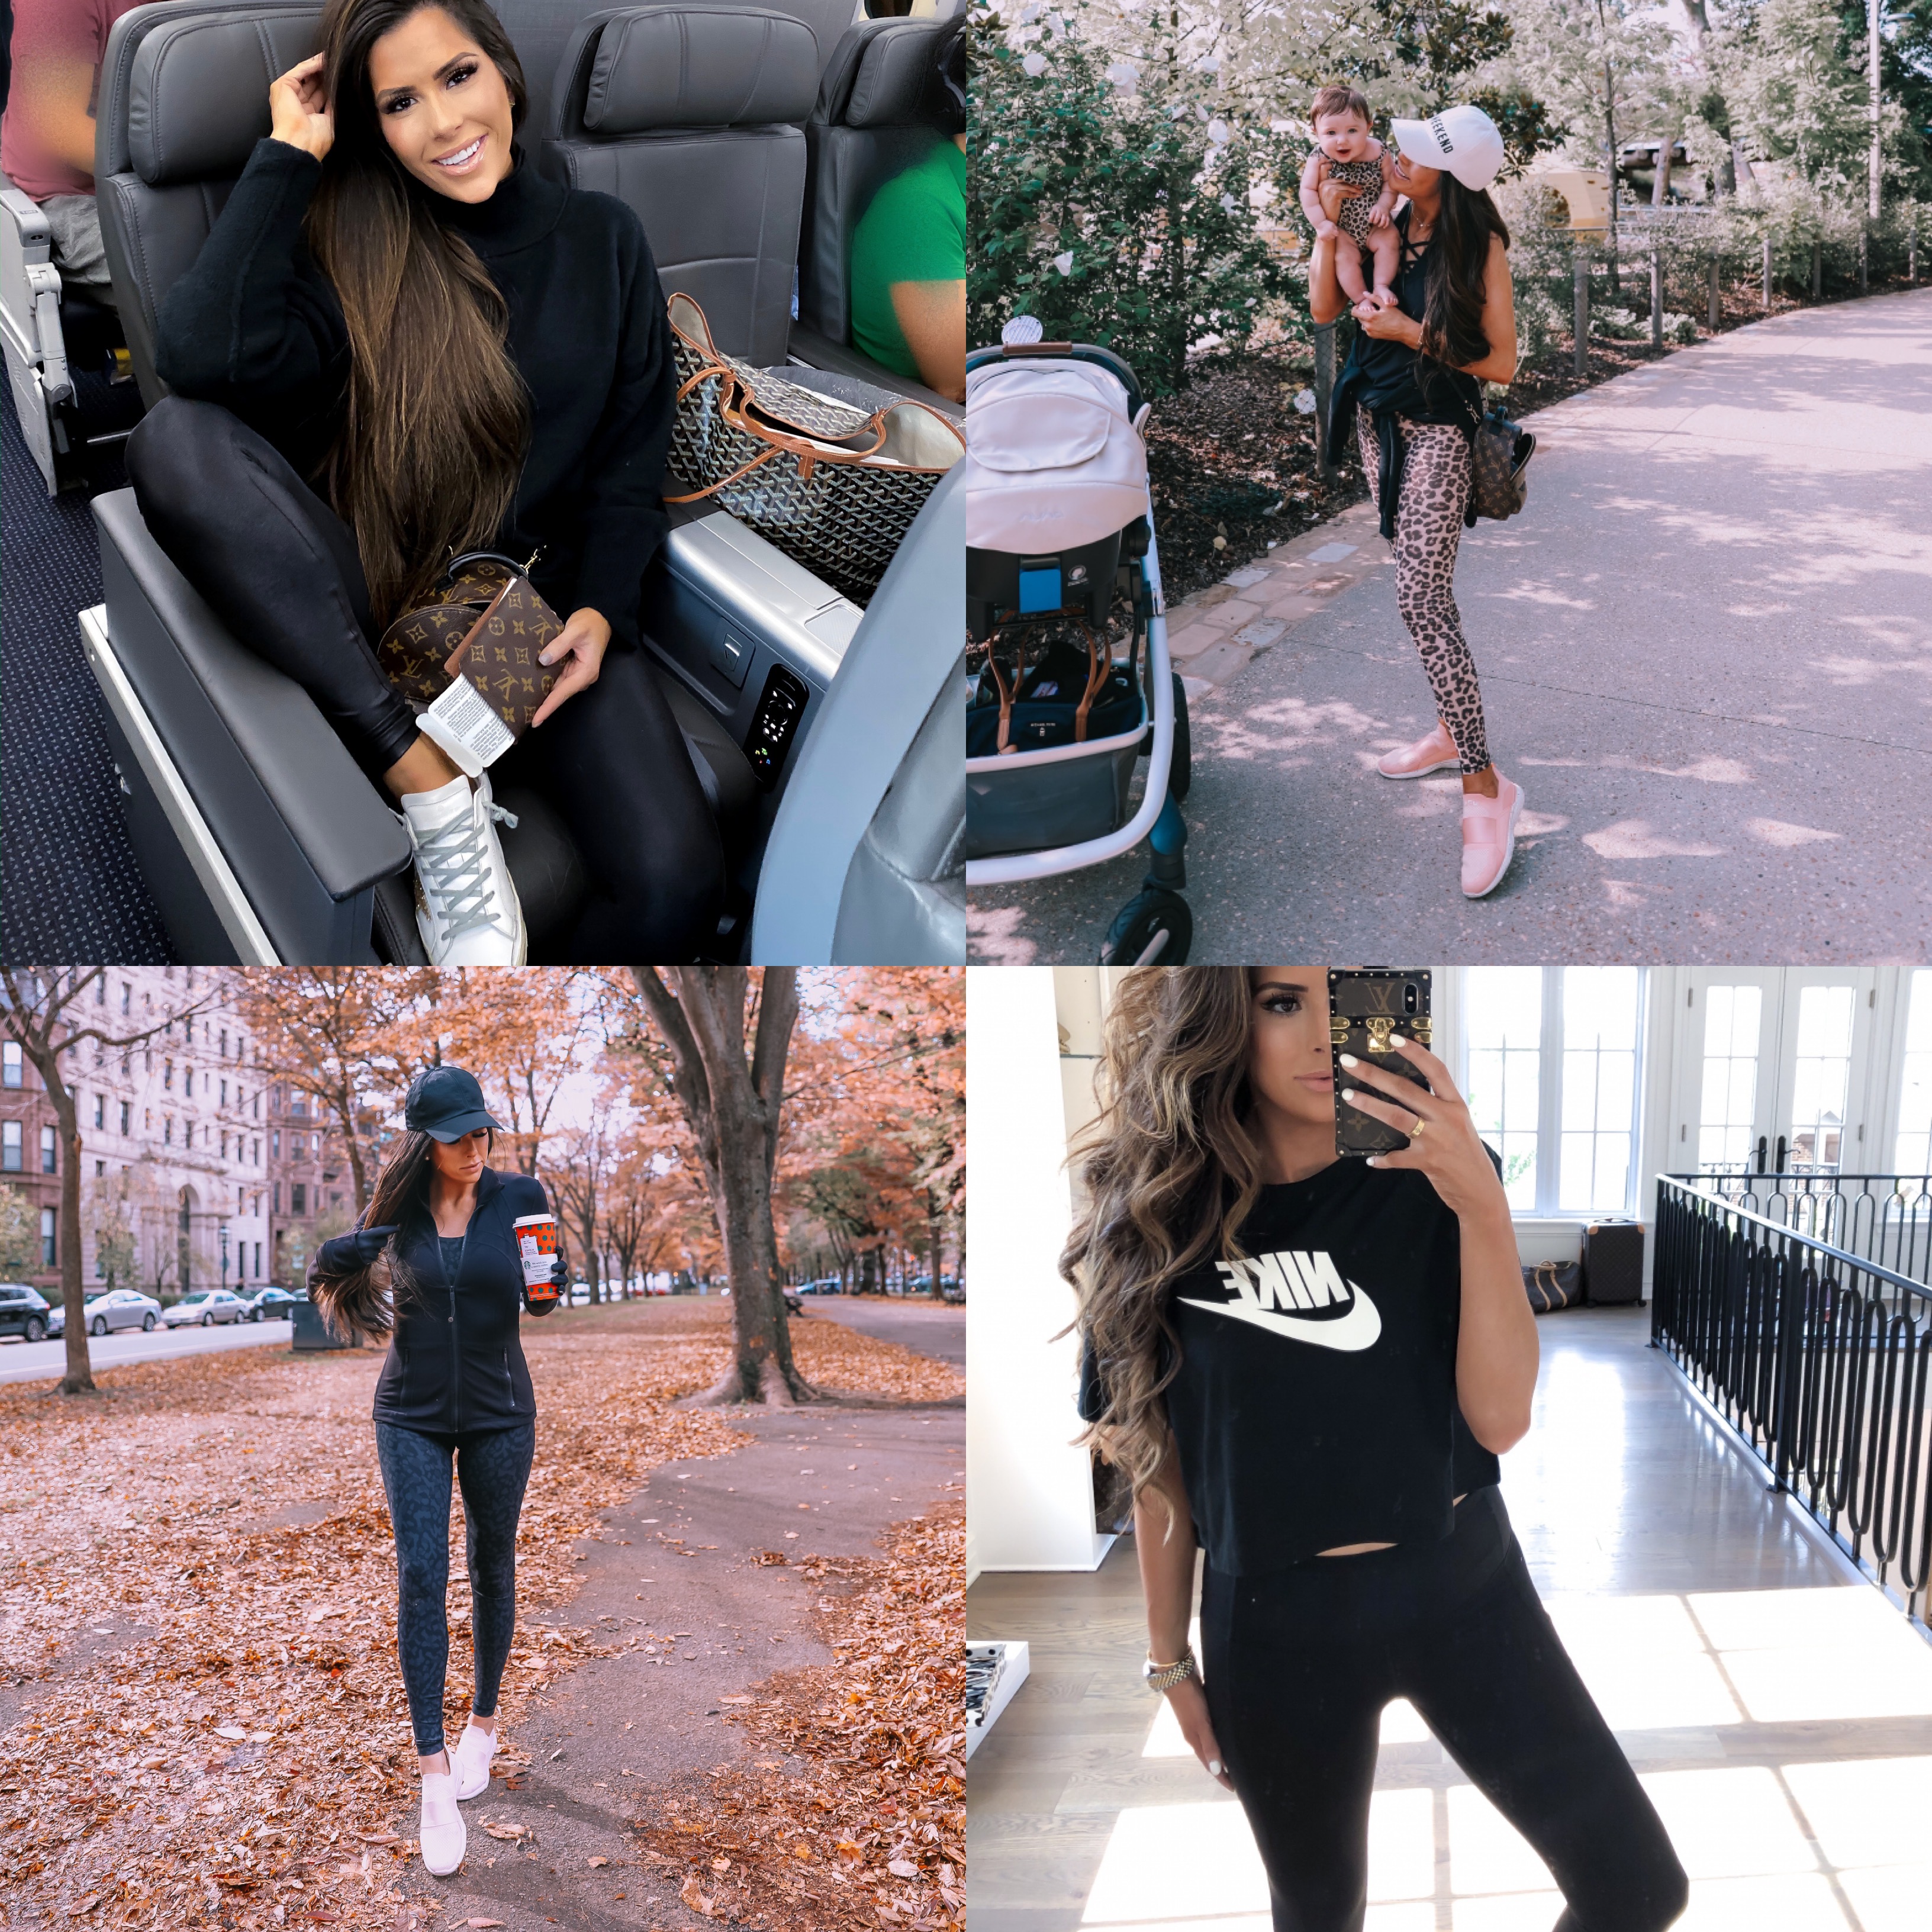 best athletic leggings lululemon, zella, spanx review | Best Wardrobe Essentials 2019👖 | Part 2 by popular US fashion blog, The Sweetest Thing: collage image of a woman wearing Nordstrom Live In High Waist Leggings ZELLA, Nordstrom Live In High Waist Pocket 7/8 Leggings ZELLA,ZELLA Mamasana Live In Maternity Ankle Leggings, Main, color, BLACK SIZE INFO XXS=00, XS=0-2, S=4-6, M=8-10, L=12-14, XL=16-18 (14W), XXL=20 (16W). Over the belly. DETAILS & CARE A stretchy, supportive panel expands with your growing bump in these lean, ankle-skimming leggings. Ideal for working out or wearing out and about, they're cut from a moisture-wicking Zeltek fabric and sewn with flatlock seaming for incredible comfort.  27" inseam; 8 1/2" leg opening; 15" front rise; 15 1/2" back rise (size Medium) Moisture-wicking Zeltek fabric dries quickly to keep you cool and comfortable Smooth flatlock seaming won't rub or irritate 88% polyester, 12% spandex Machine wash, tumble dry Imported Women's Active & Swim Item #5623737 Helpful info: See details and tips from a salesperson (video) Activewear Glossary Free Shipping & Returns See more (262) Mamasana Live In Maternity Ankle Leggings ZELLA, Nordstrom Faux Leather Leggings SPANX®, and Lululemon Align Pant 28".